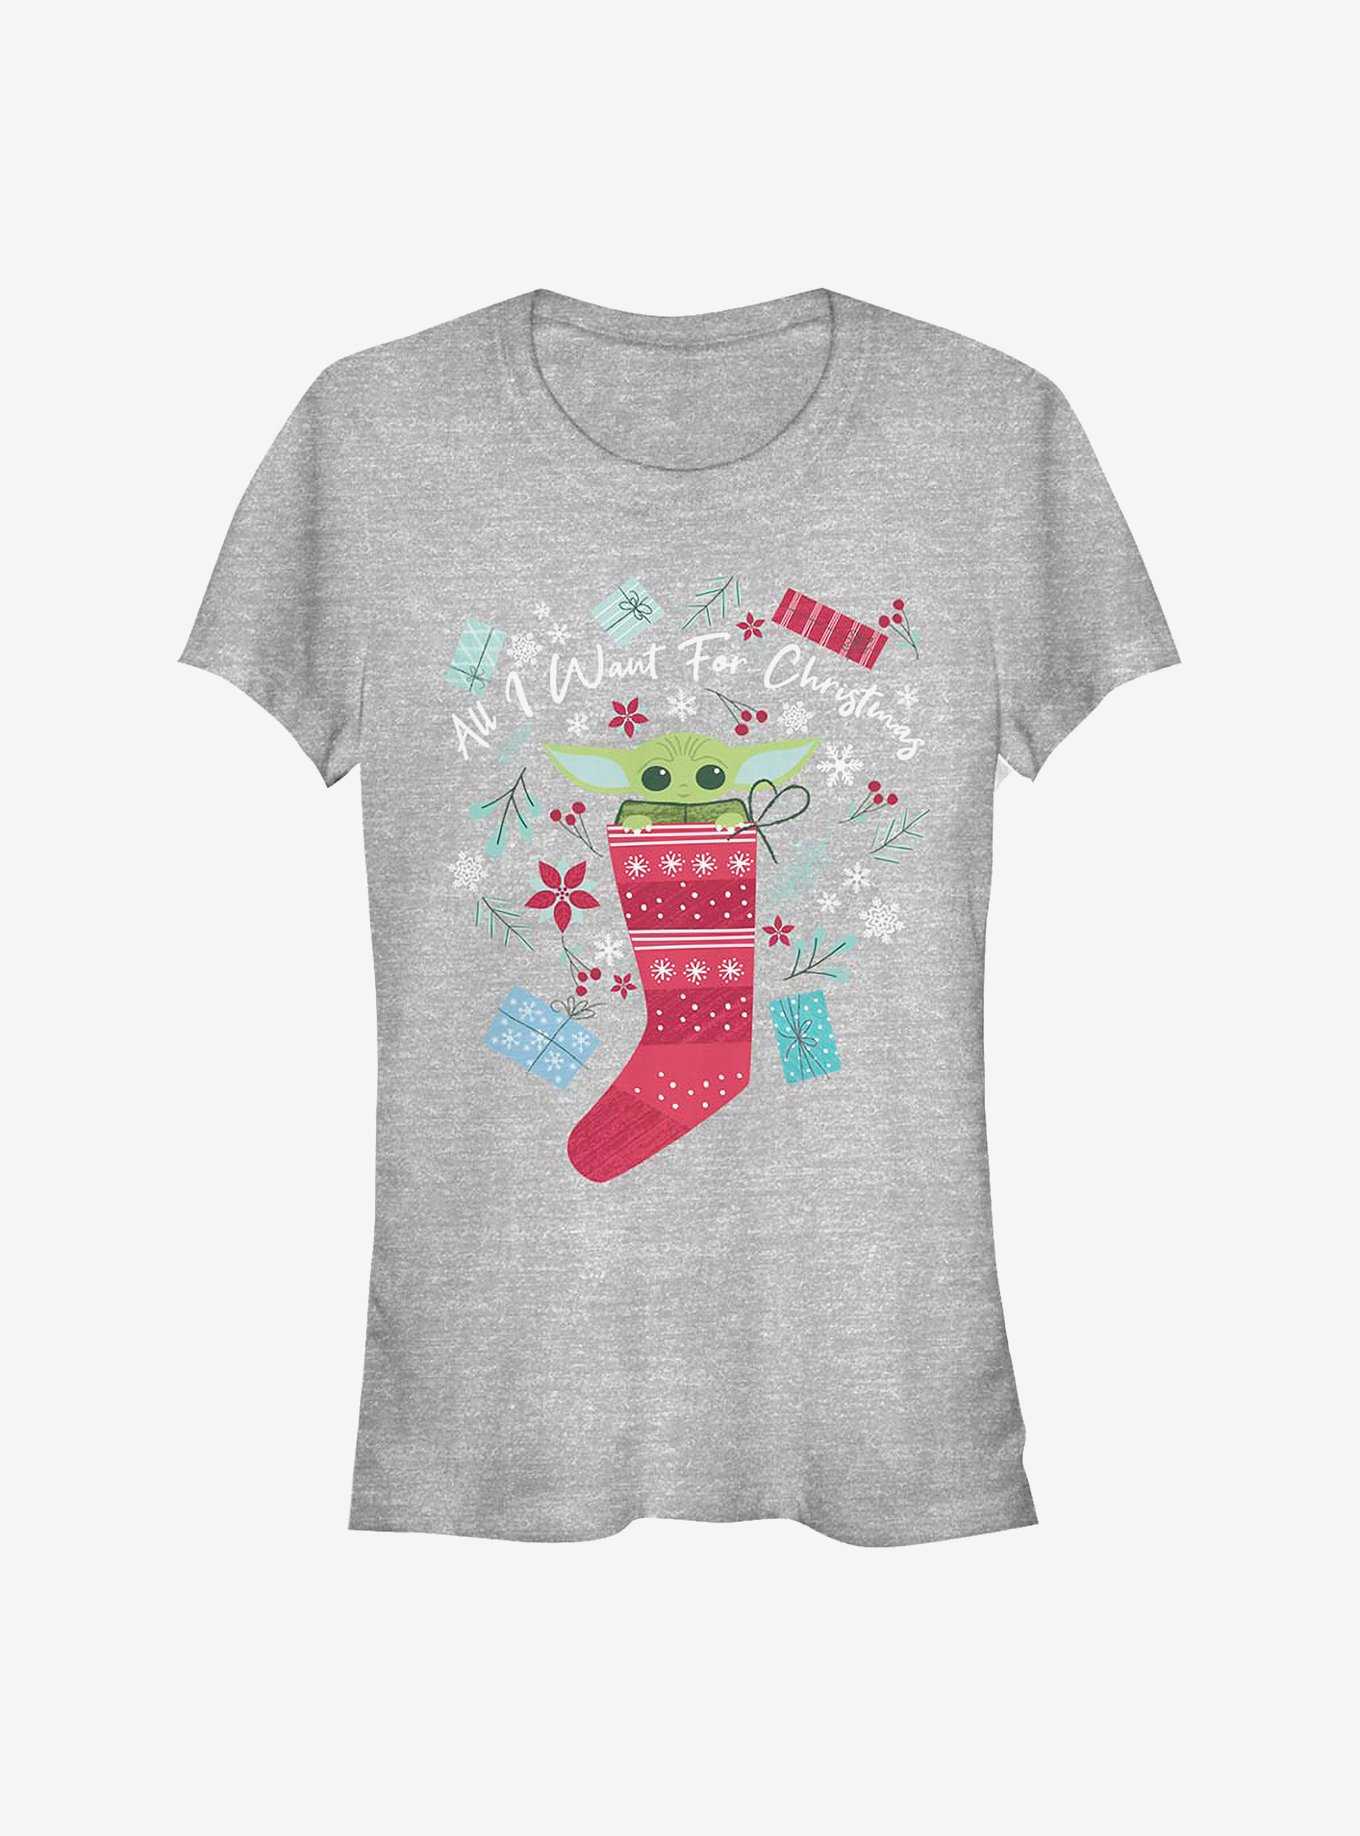 Star Wars The Mandalorian The Child All I Want For Christmas Girls T-Shirt, , hi-res